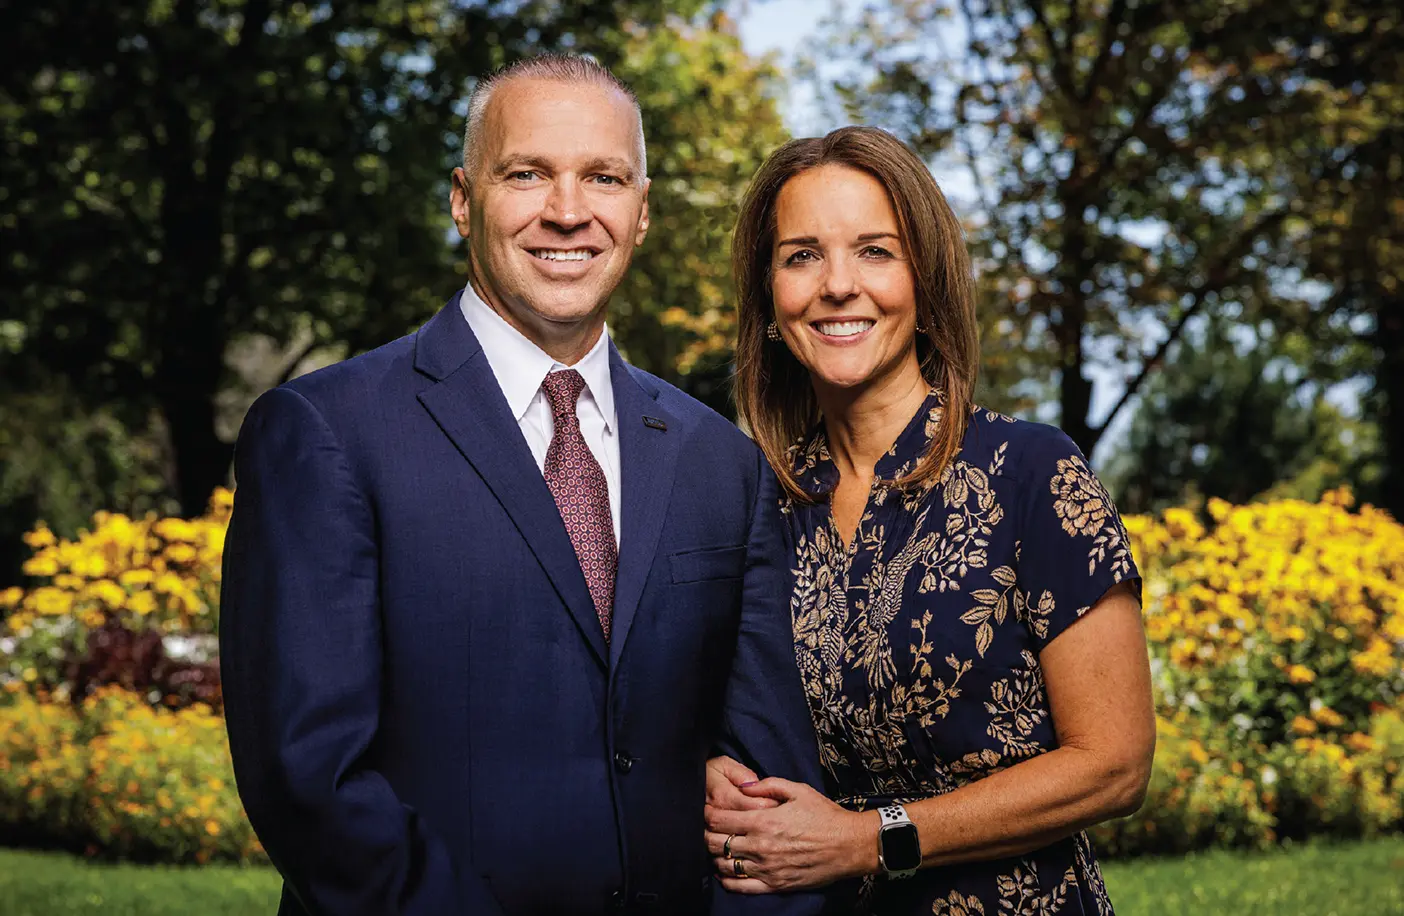 BYU president C. Shane Reese and his wife, Wendy Reese.